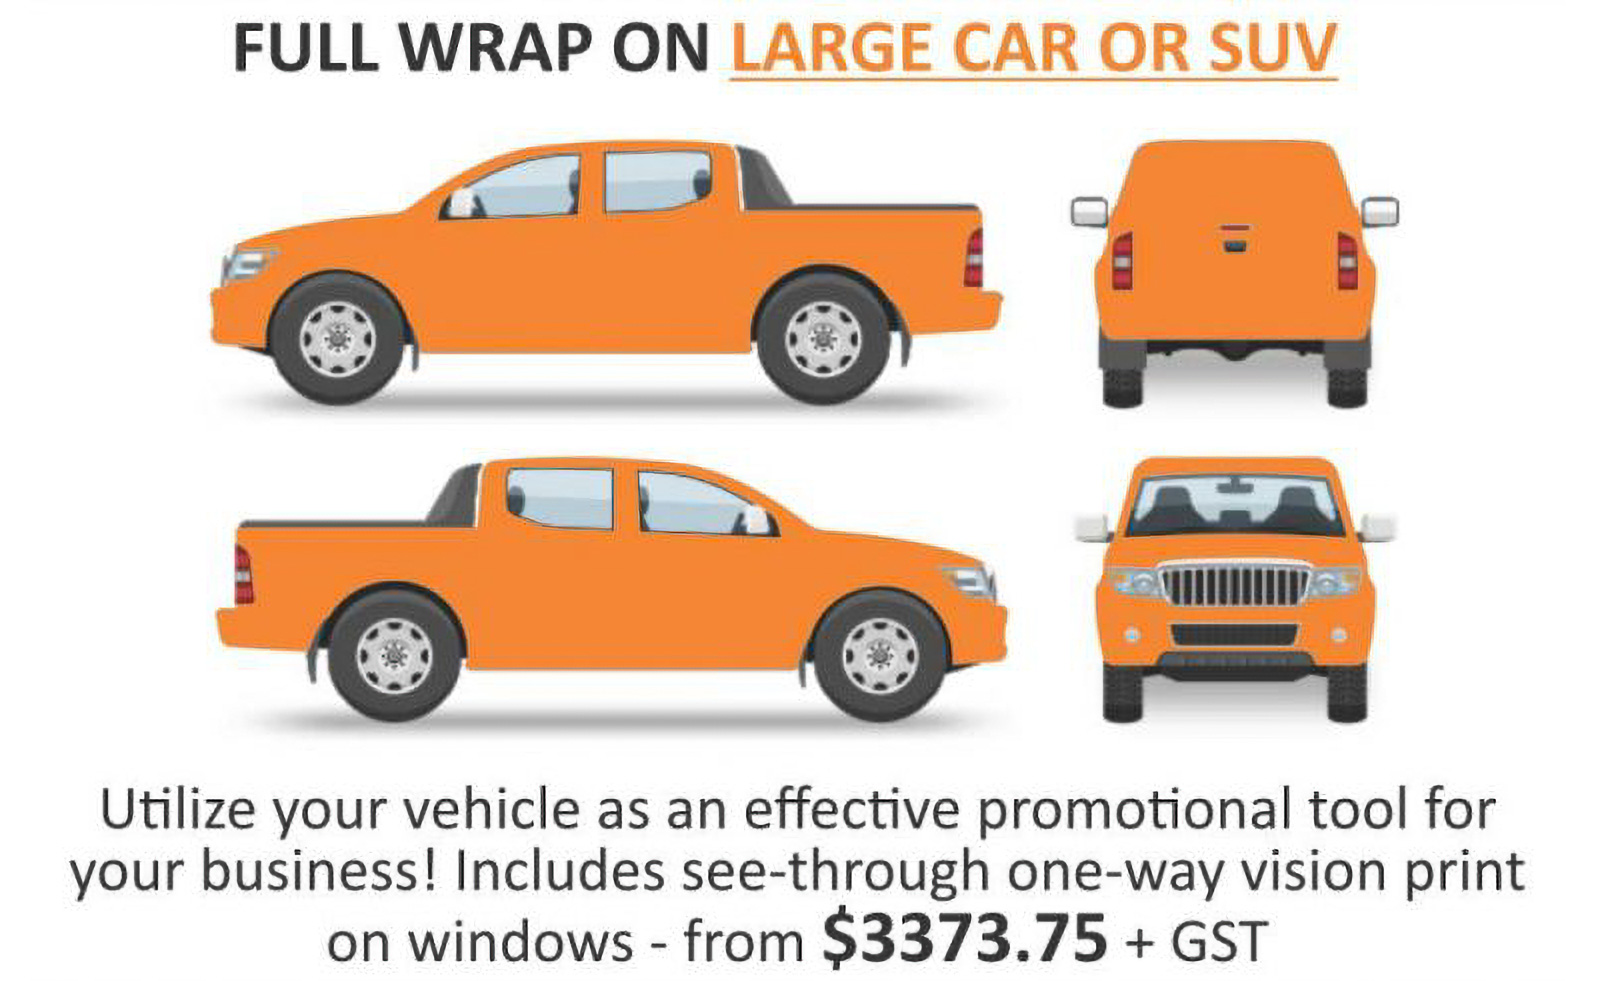 Full wrap vehicle signage pricing for large car or suv in Newcastle